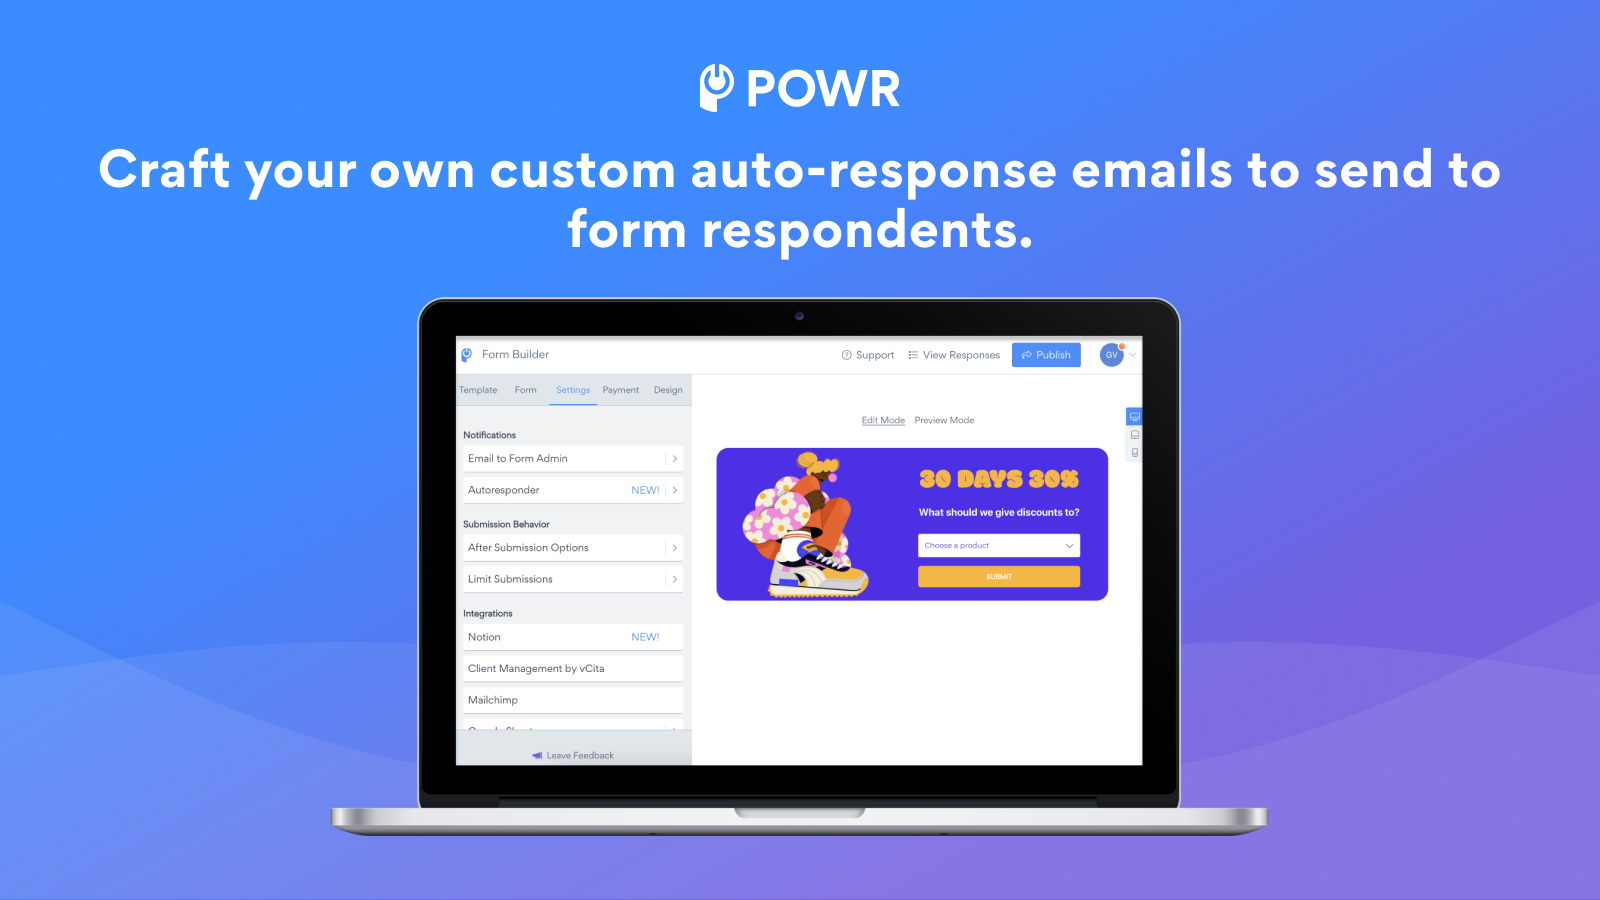 Craft your own custom auto-response emails to send.